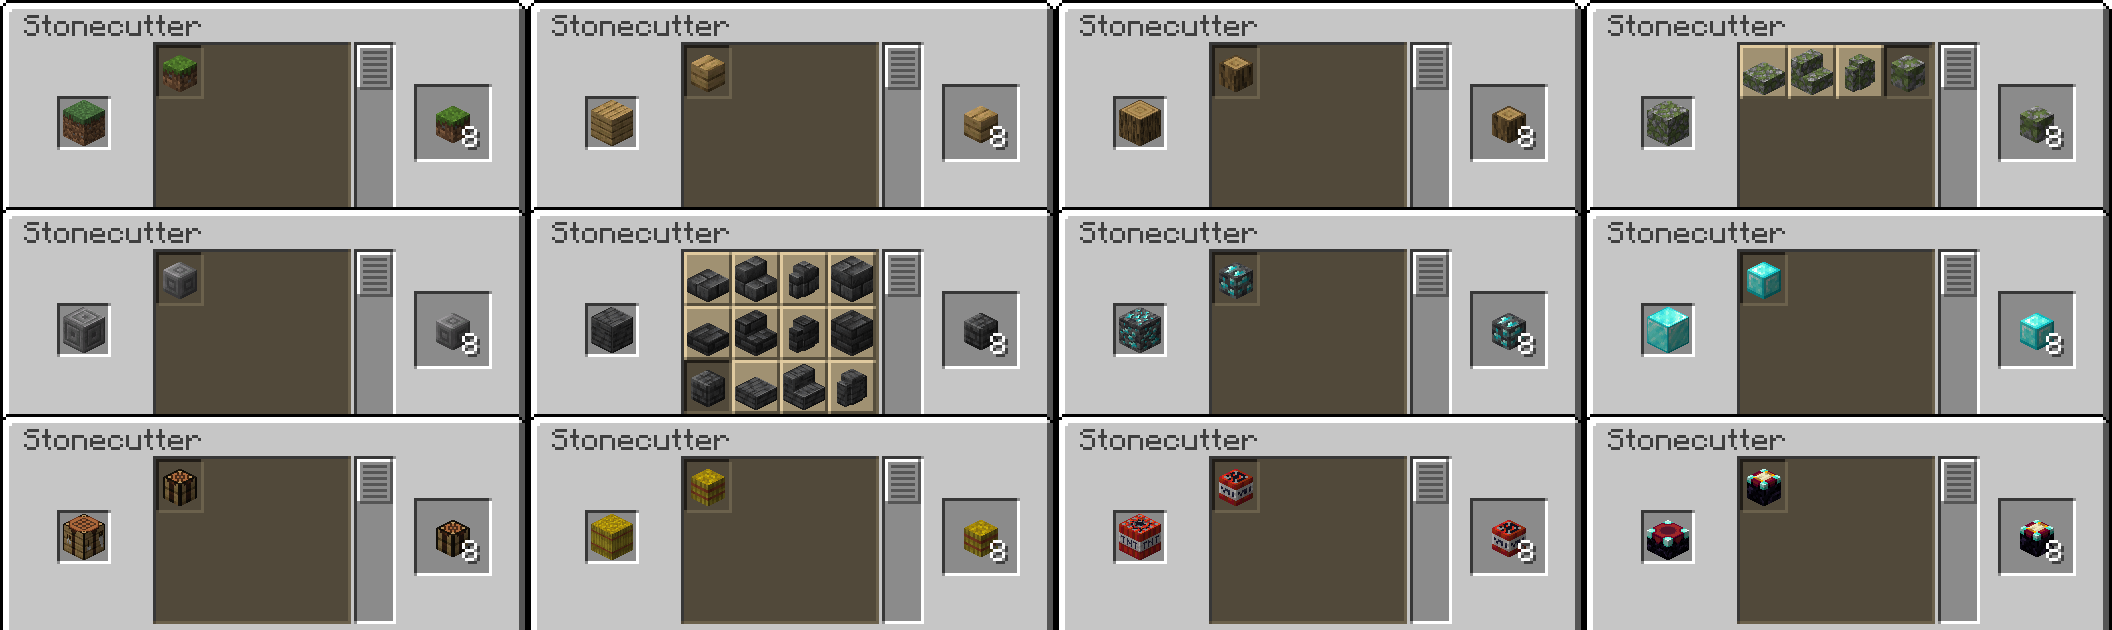 Some examples of how the recipes appear in the stonecutter menu